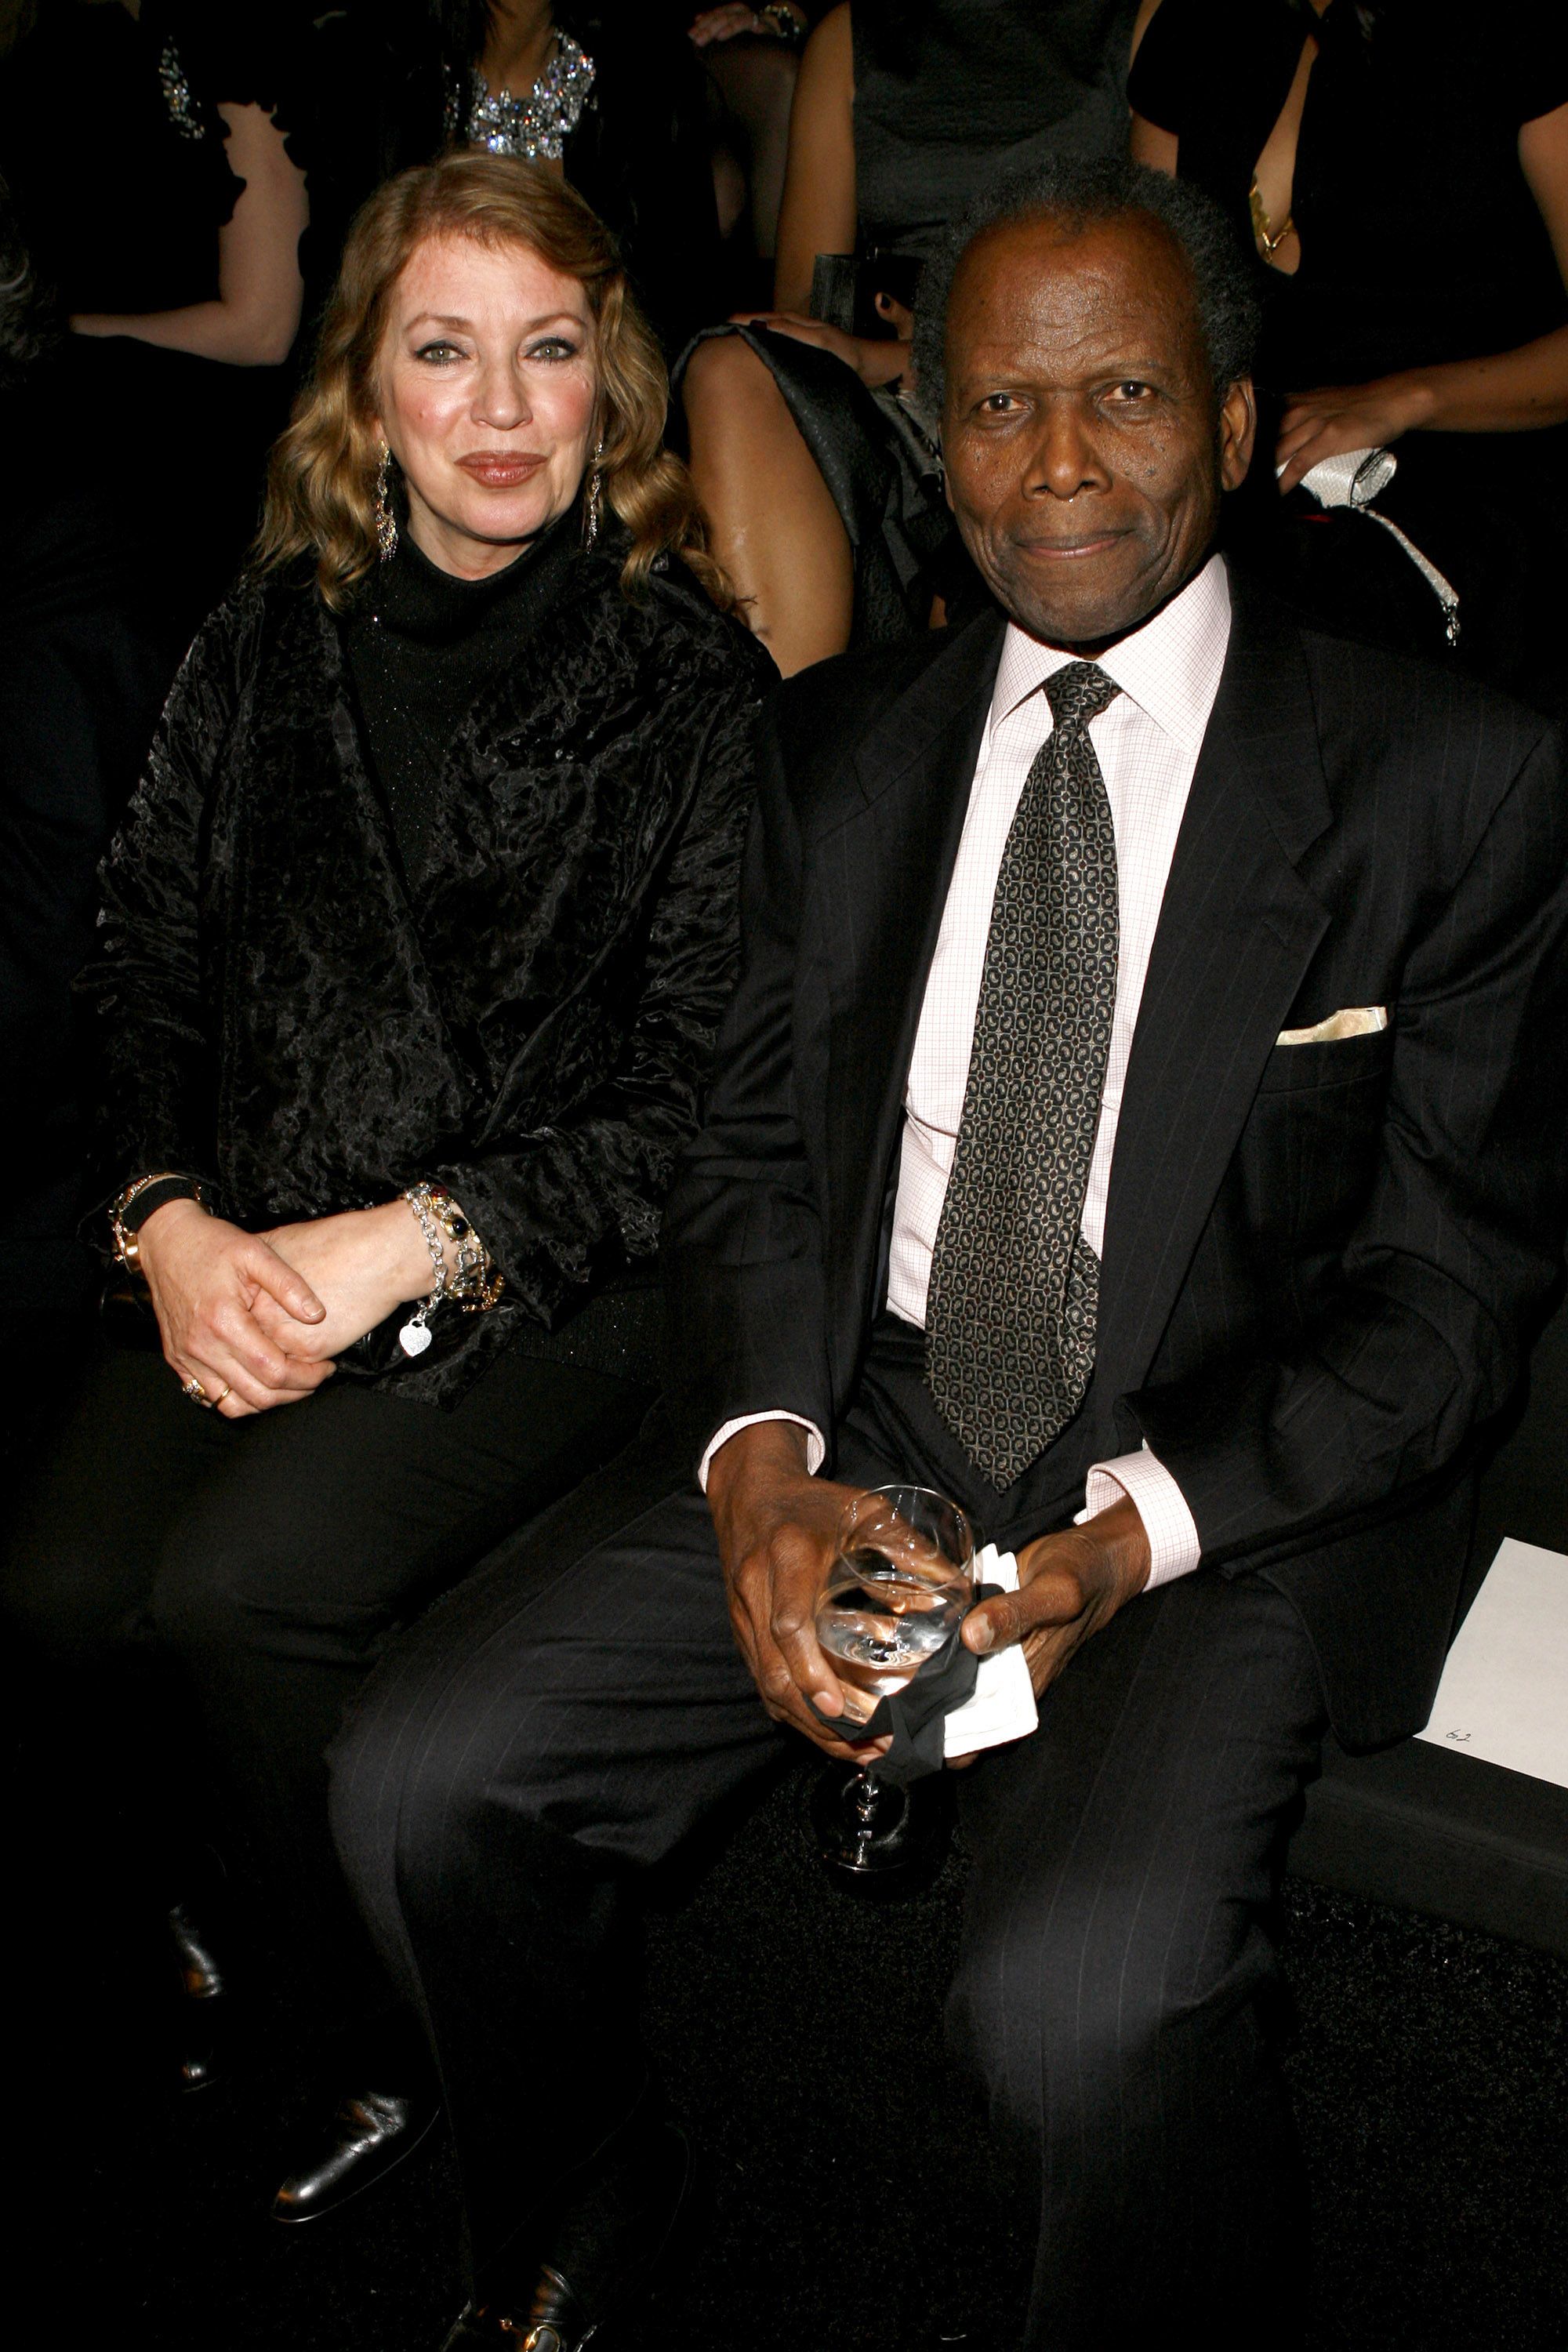 Sidney Poitier and Joanna Shimkus during Giorgio Armani Prive in Los Angeles | Source: Getty Images